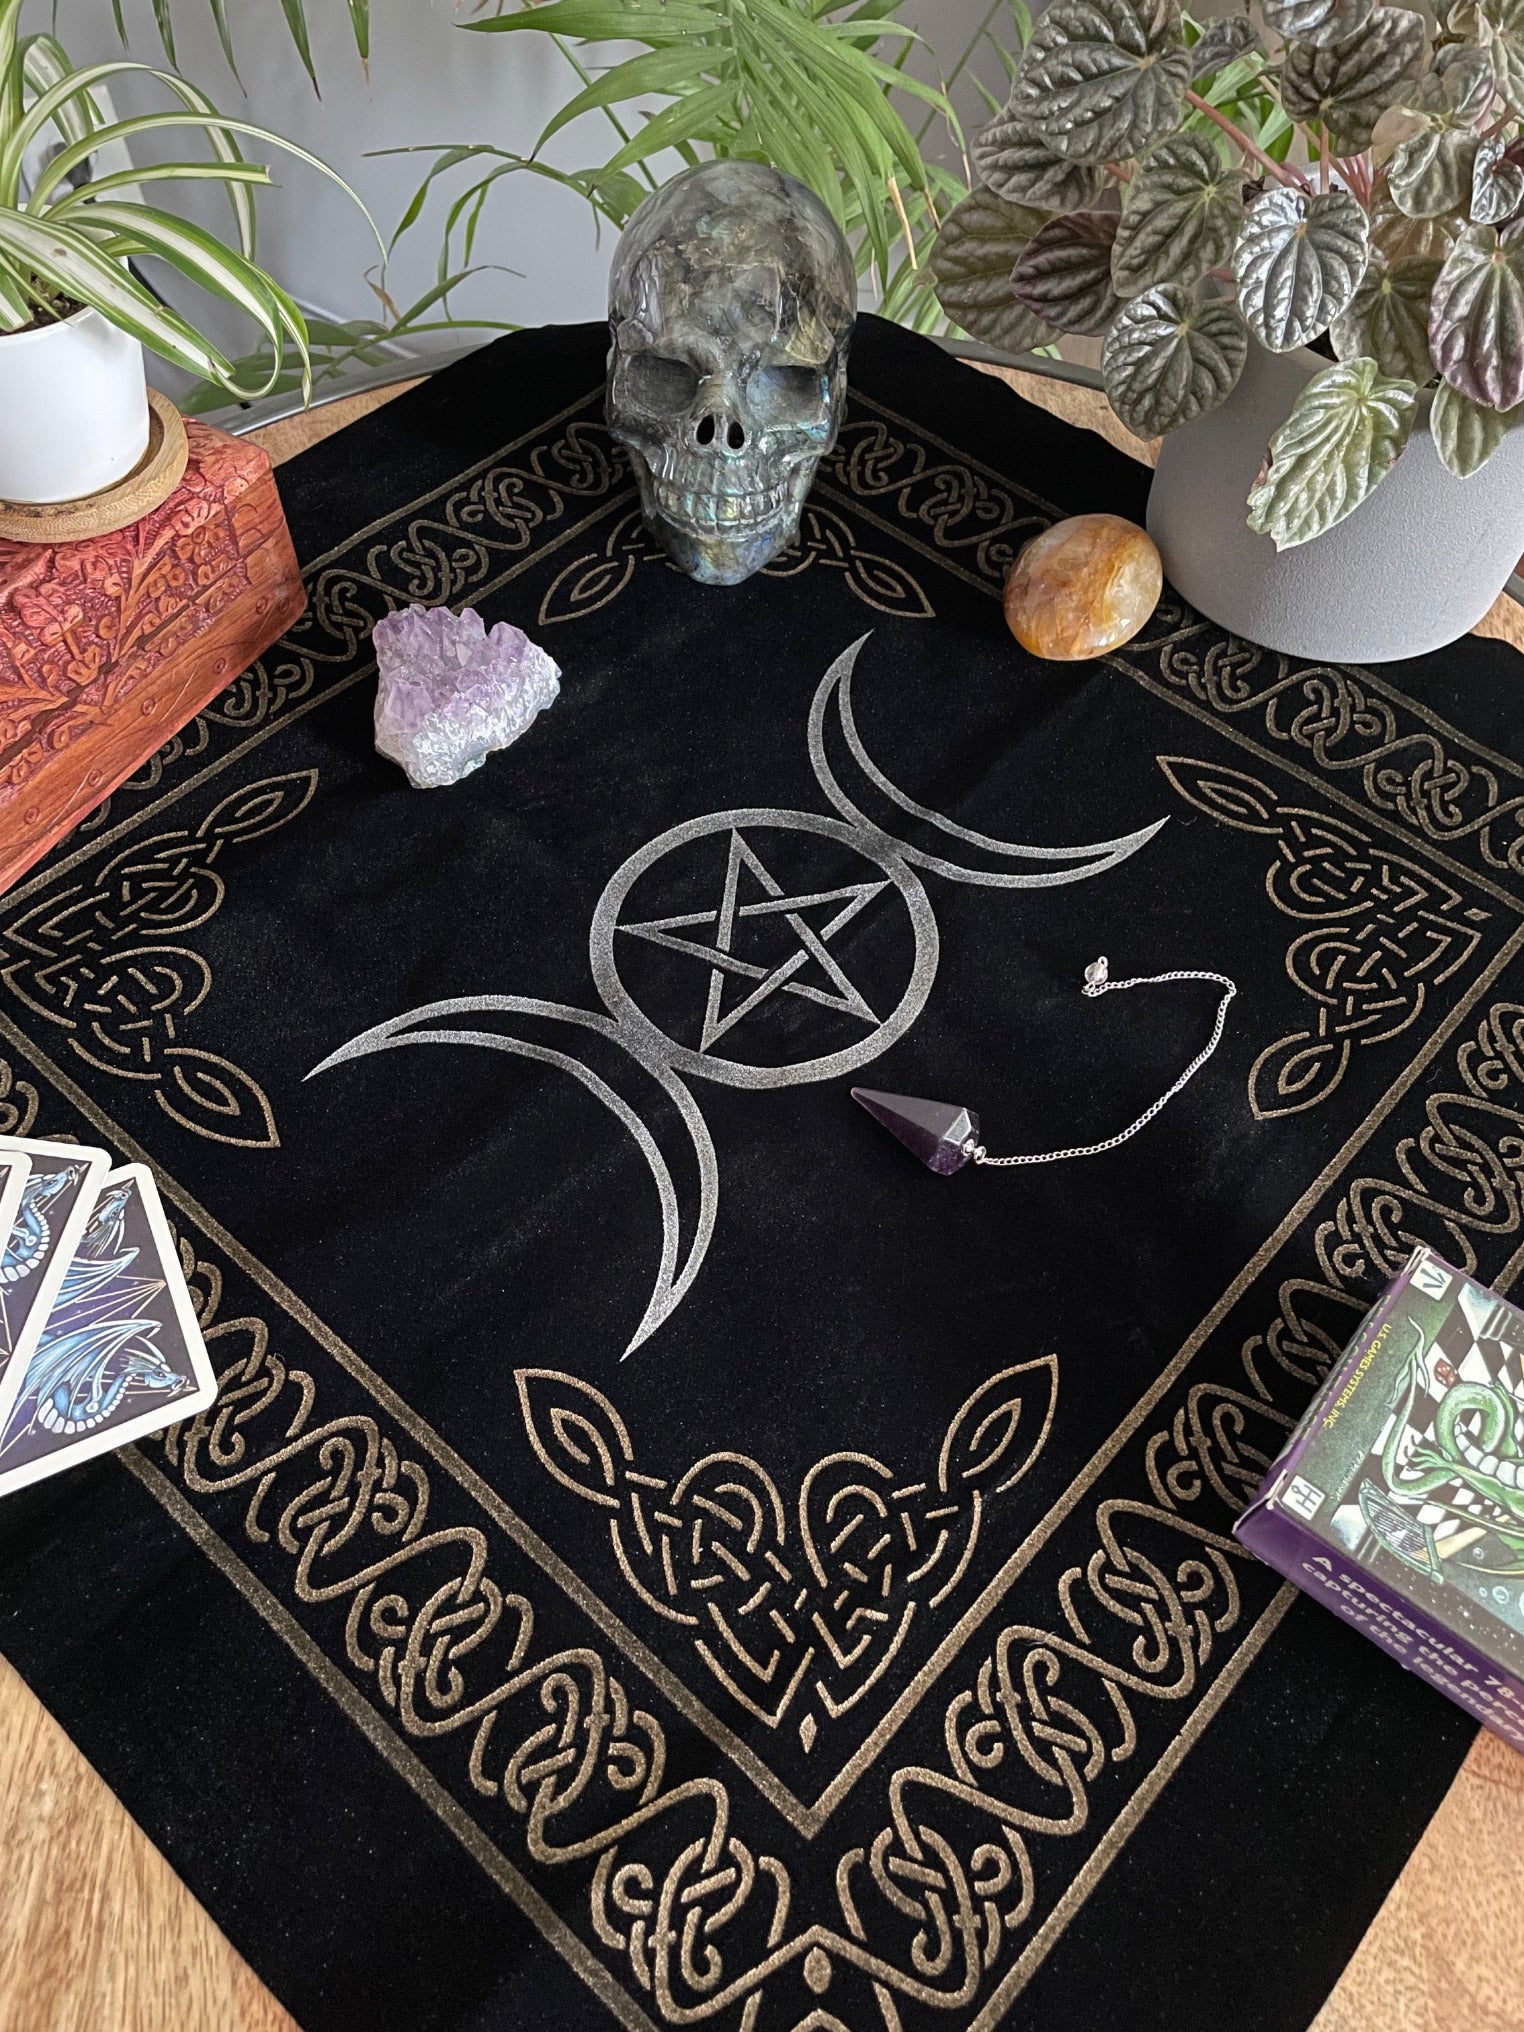 Pictured is a black velvet altar cloth with a silver pentacle and triple moon symbol in the middle.